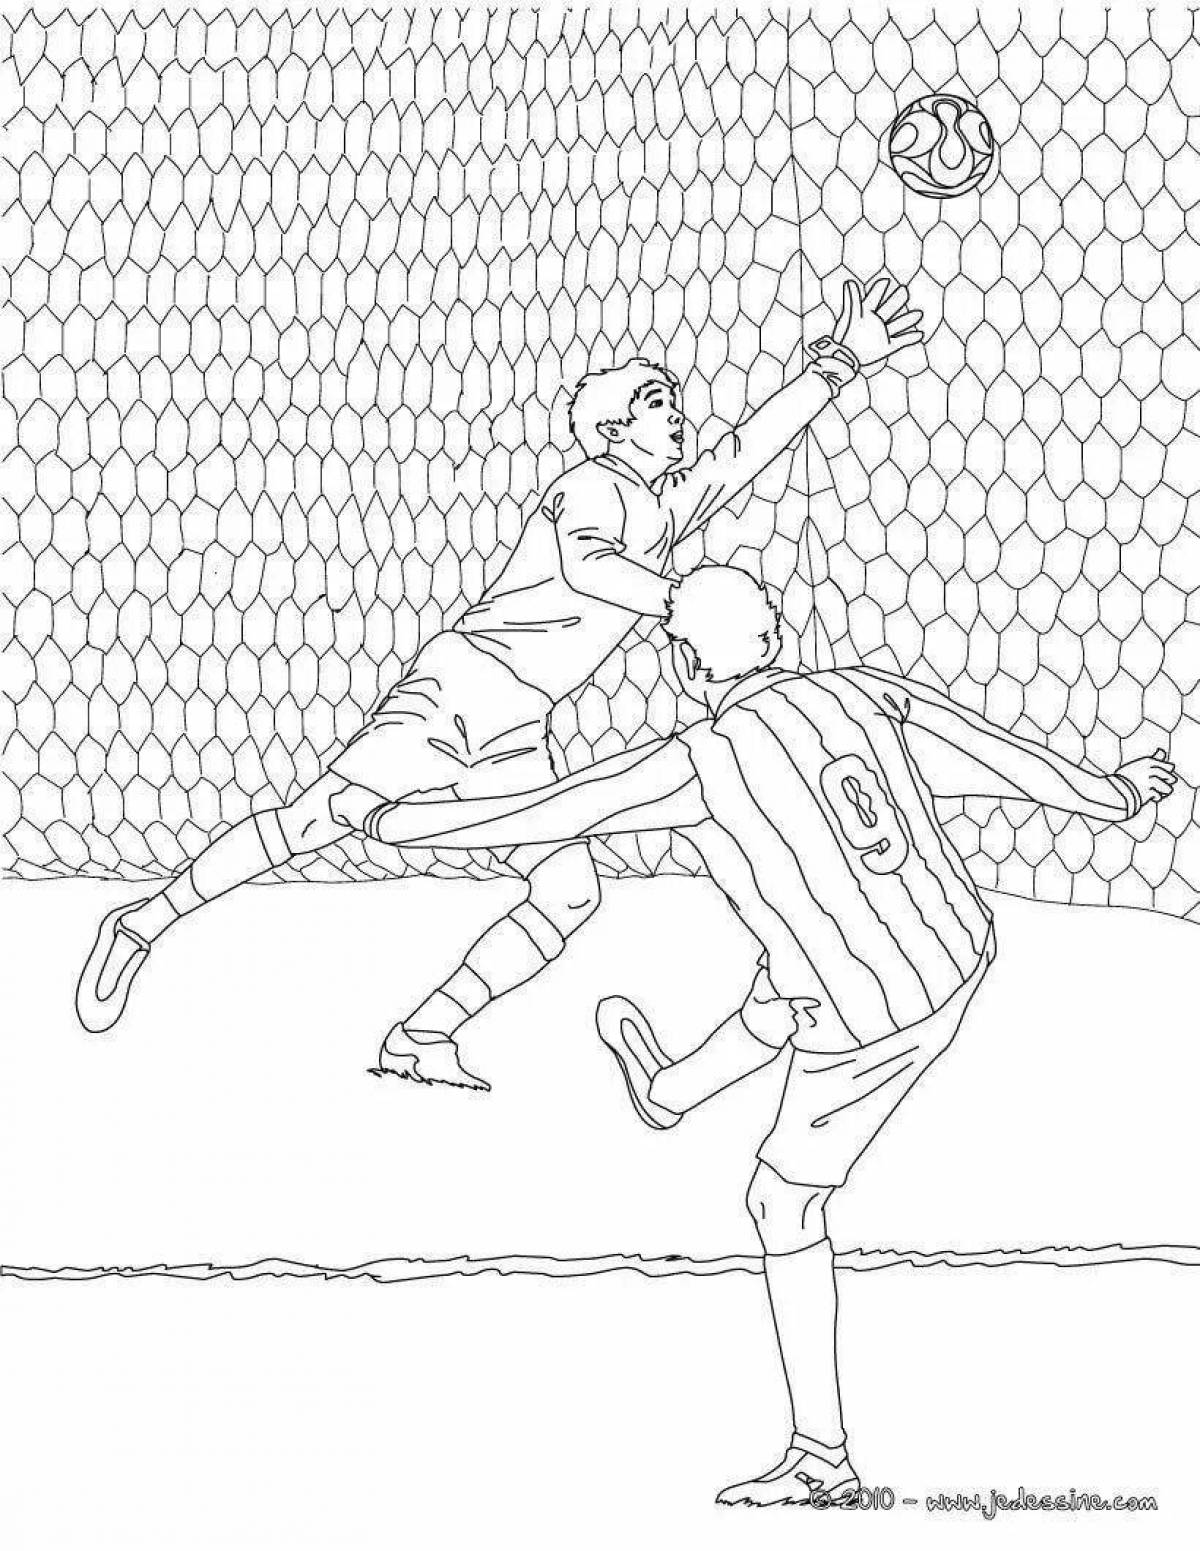 Colorful football goalkeeper coloring page